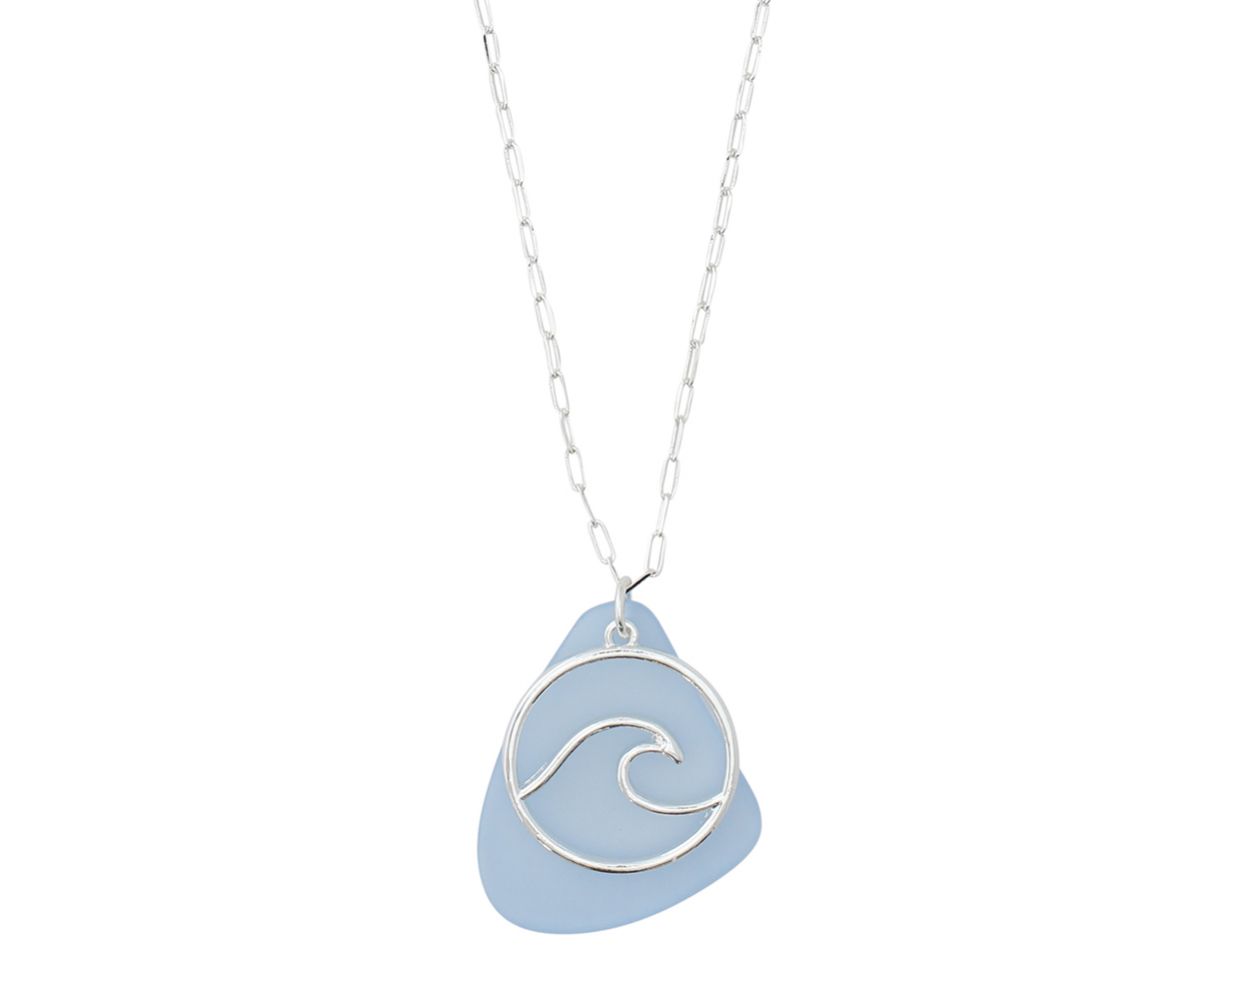 Periwinkle Blue Seaglass Wave Necklace